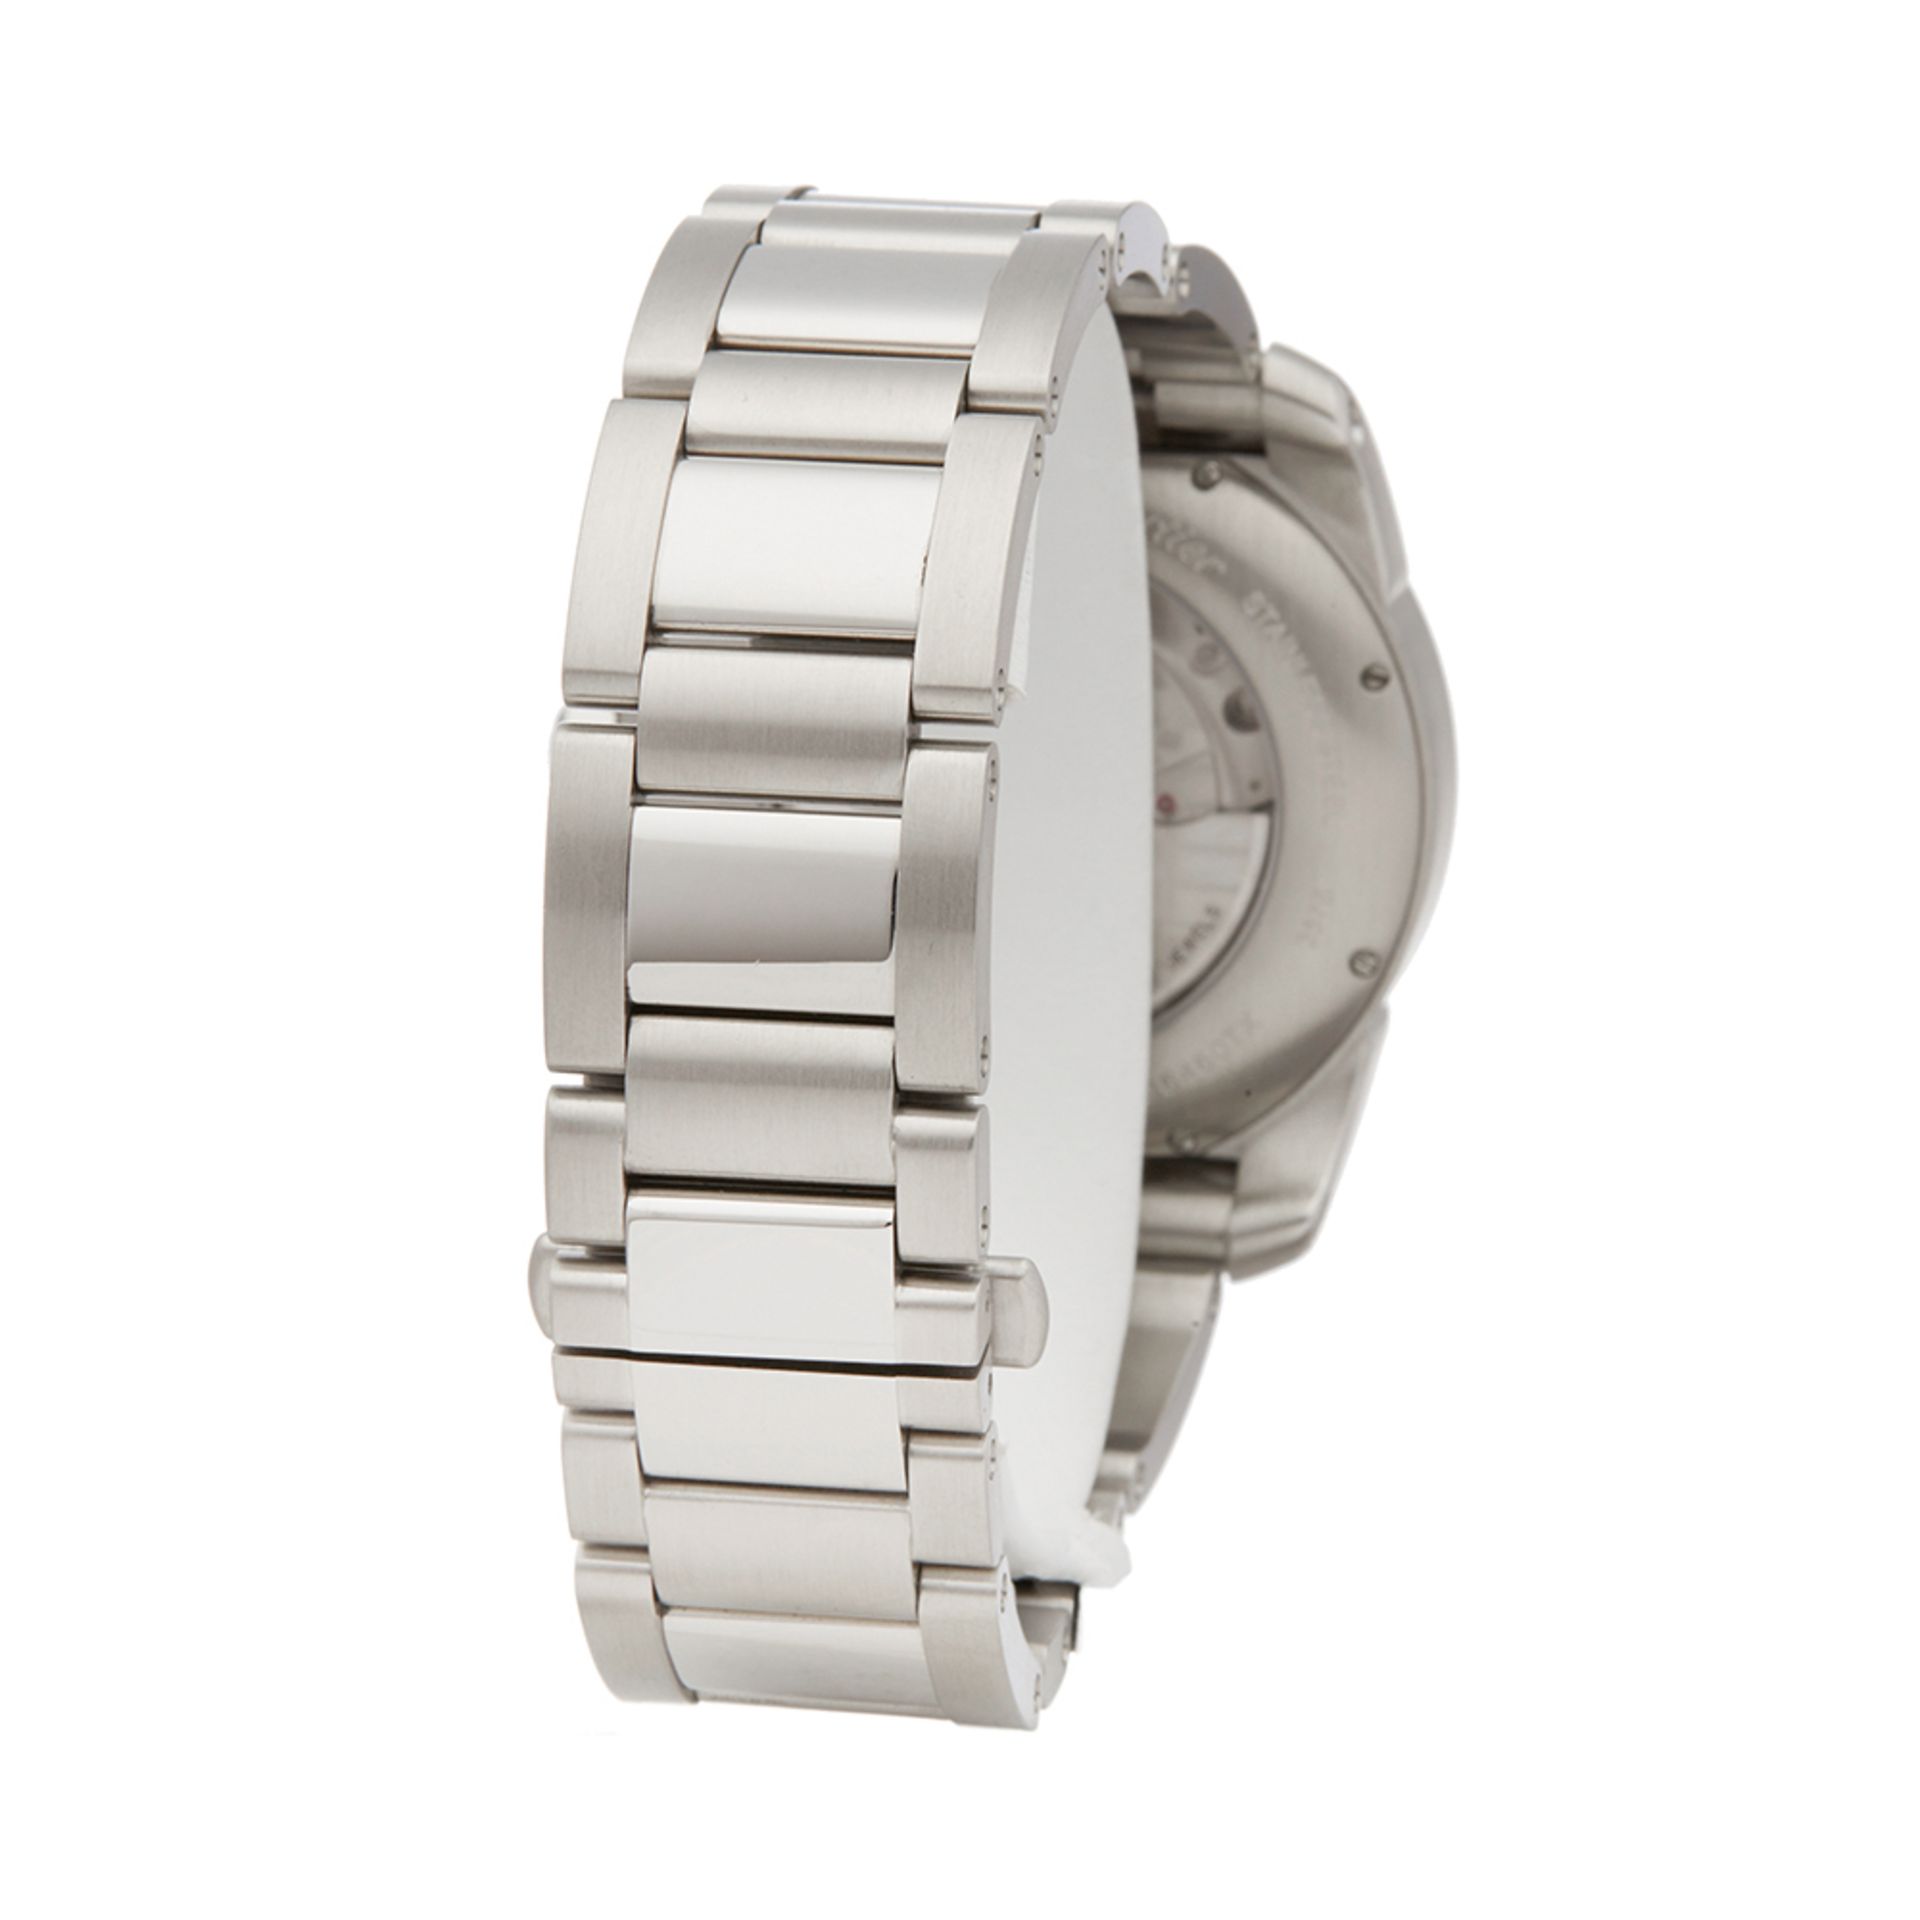 Cartier Calibre W7100061 or 3578 Men Stainless Steel  Watch - Image 5 of 8